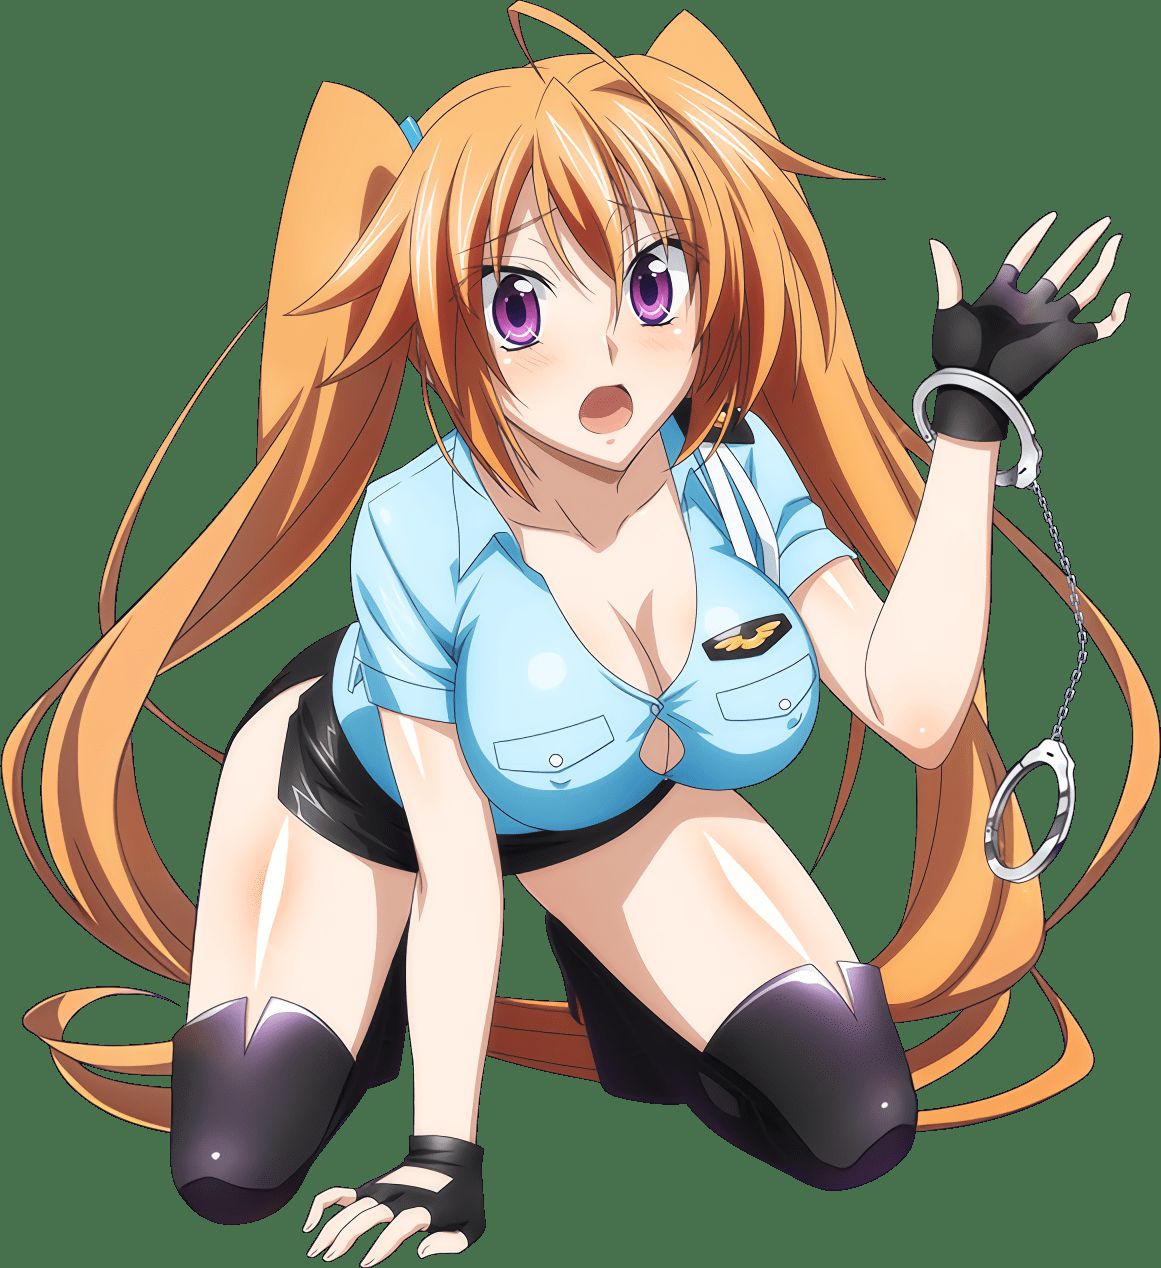 [Anime character material] png background of animated characters erotic images that 161 5